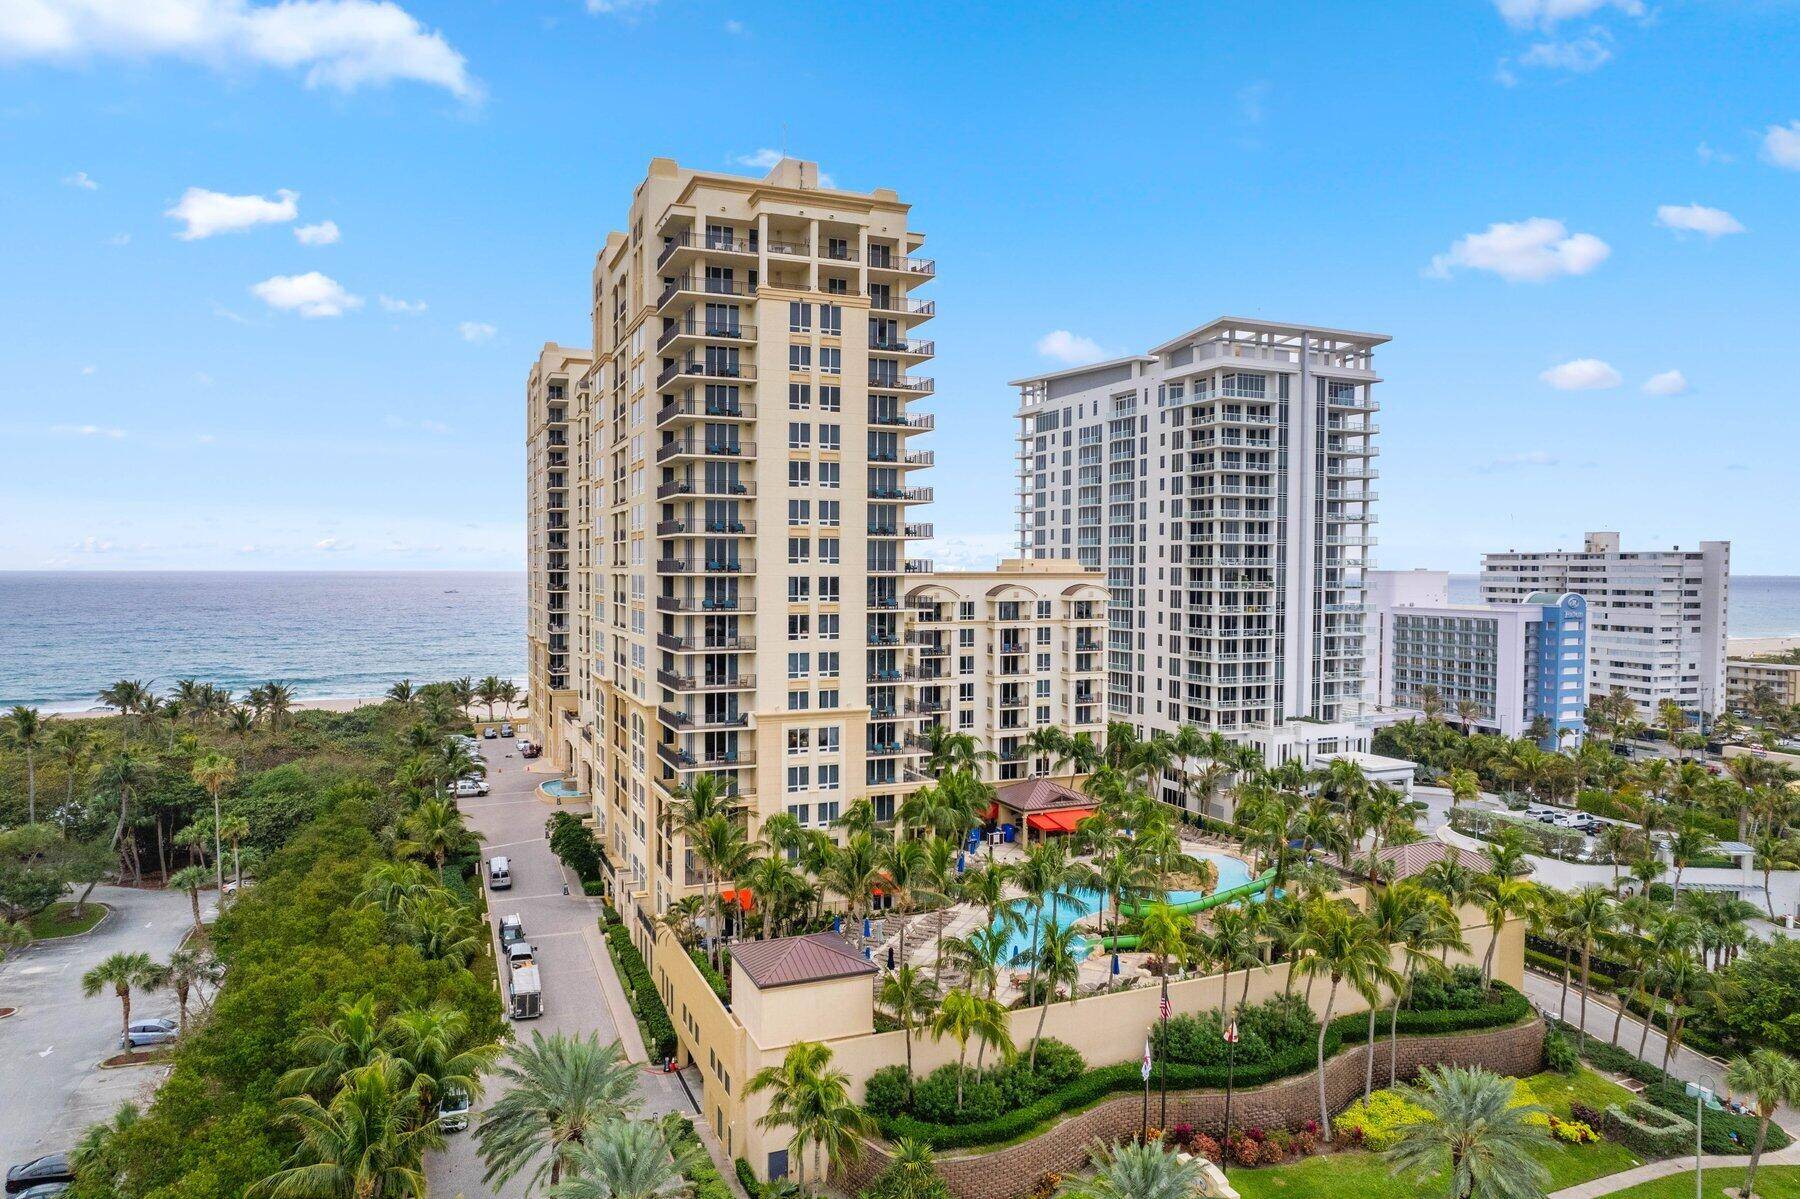 Panoramic and unobstructed views from the ocean, over the beach park to the Intracoastal await you when entering.